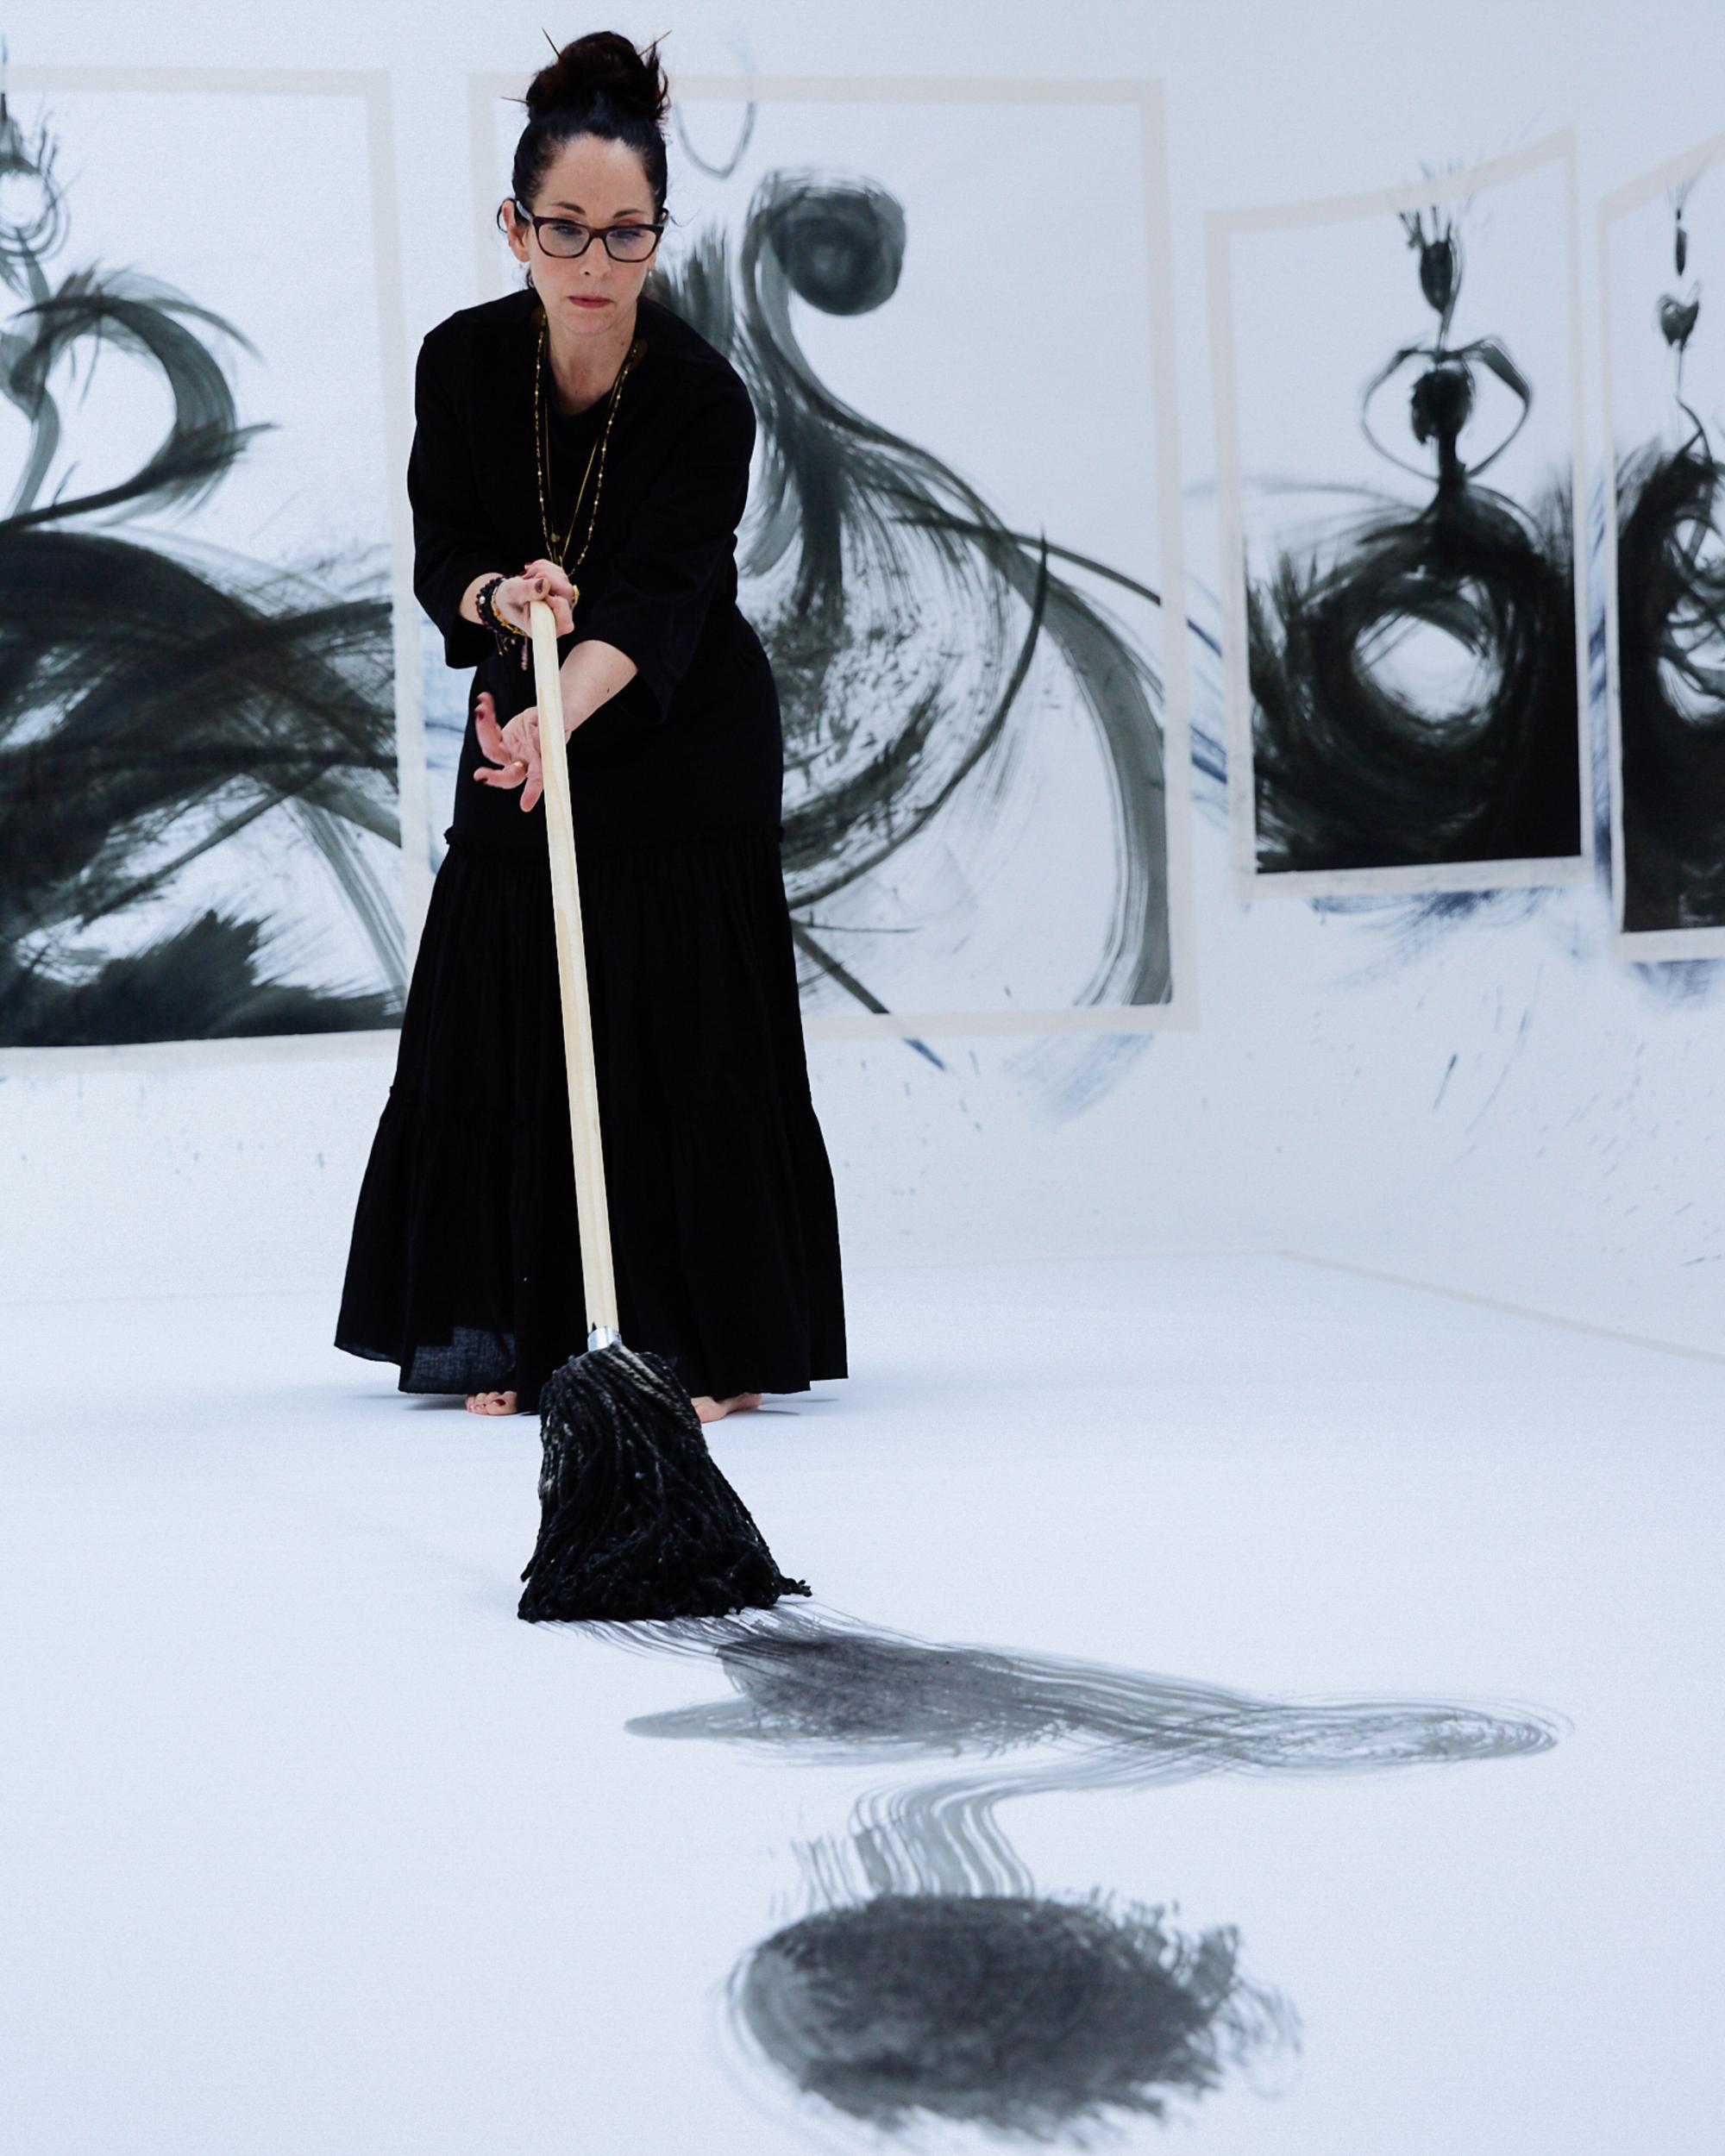  | SHOWStudio | Nightlight Series: On 26 April 2019, artist Tobie Giddio took up residency in the SHOWstudio space to create a large-scale fashion illustration live. The broadcast showcases Giddio’s creative process from start to finish, documenting her as she paints the walls and floor of the studio cove with ink. For this work, Giddio utilises a unique set of tools, comprising large Japanese brushes, mops and feather dusters.  | 12